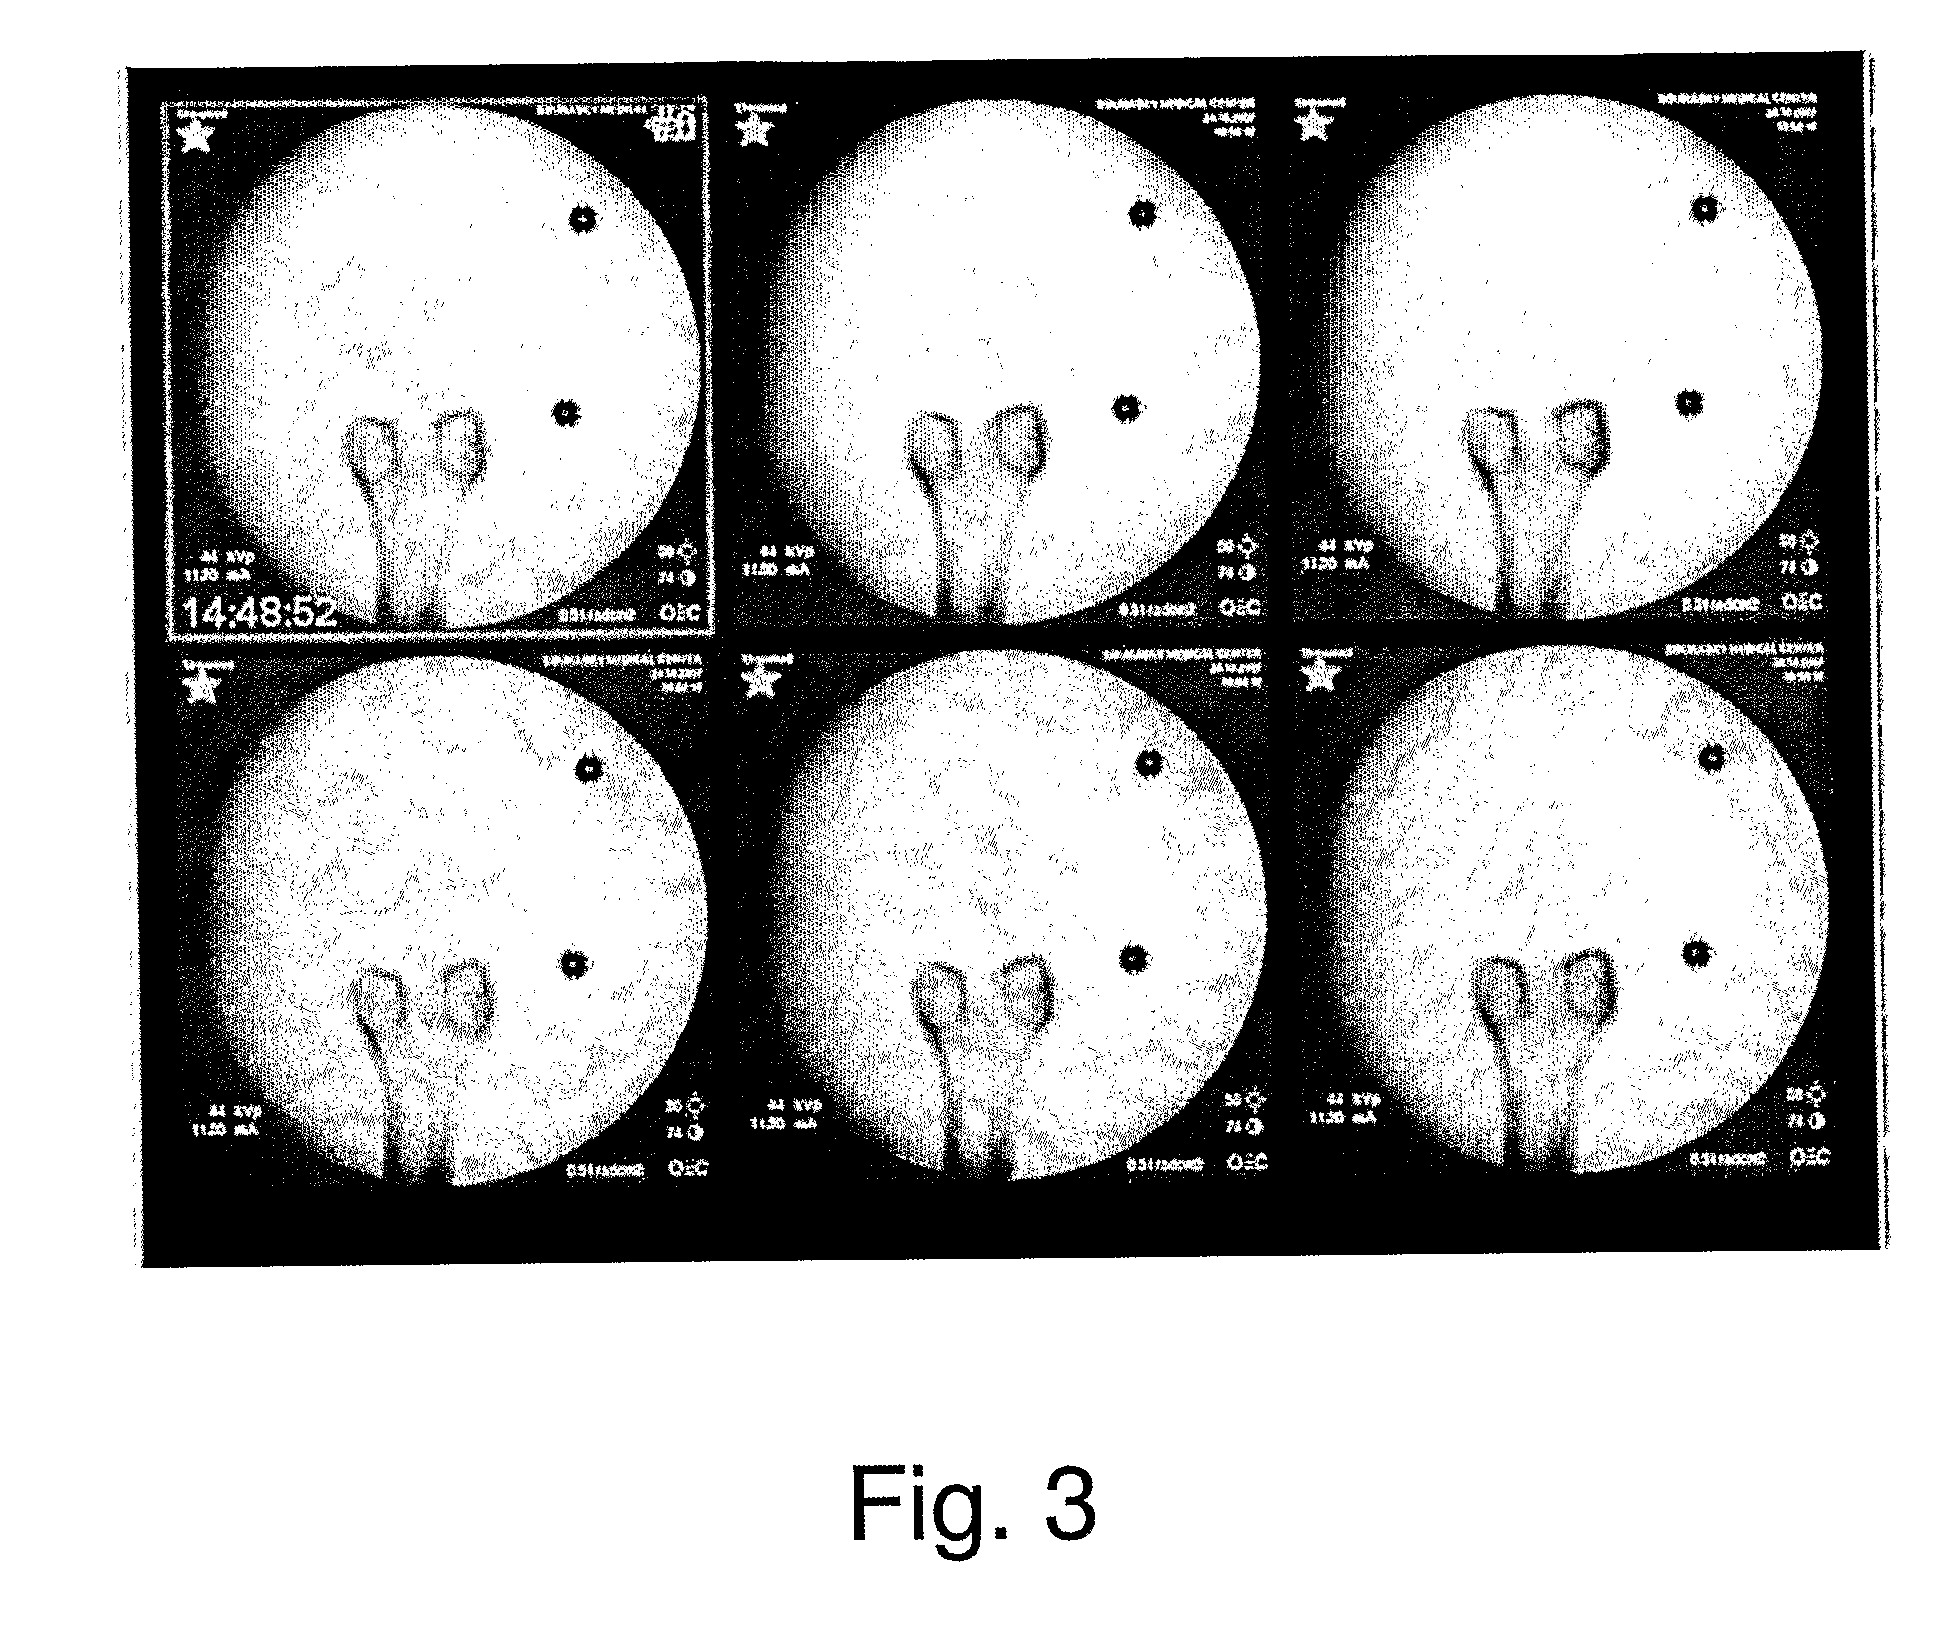 Method and system for stitching multiple images into a panoramic image